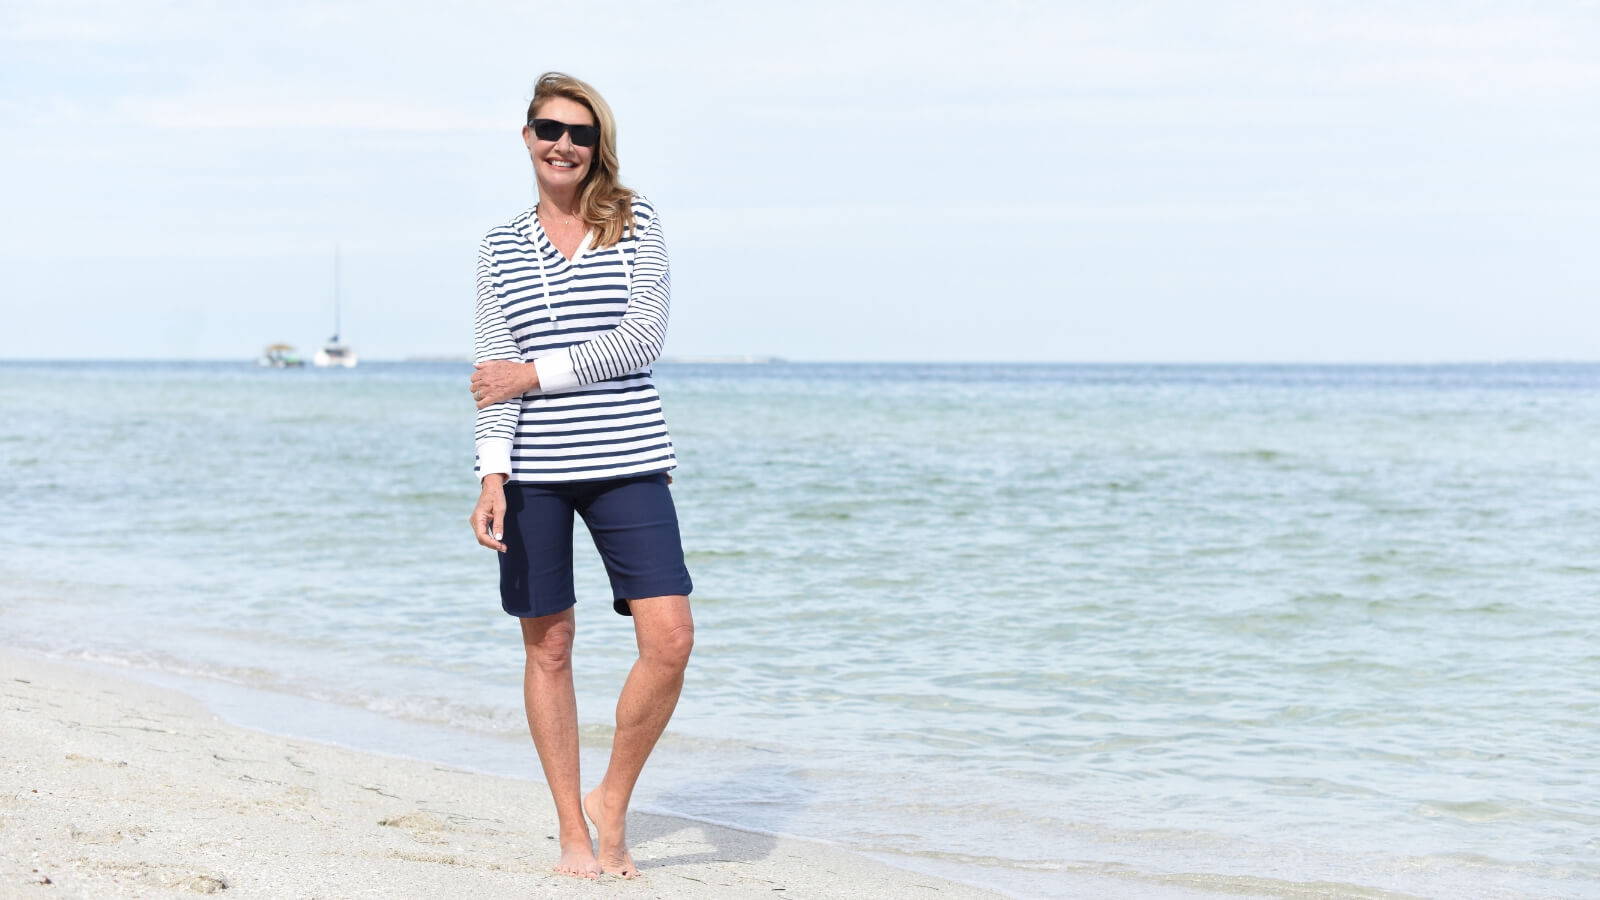 A blonde woman in a striped top, shorts, and sunglasses smiles as she wades in the water at the beach 